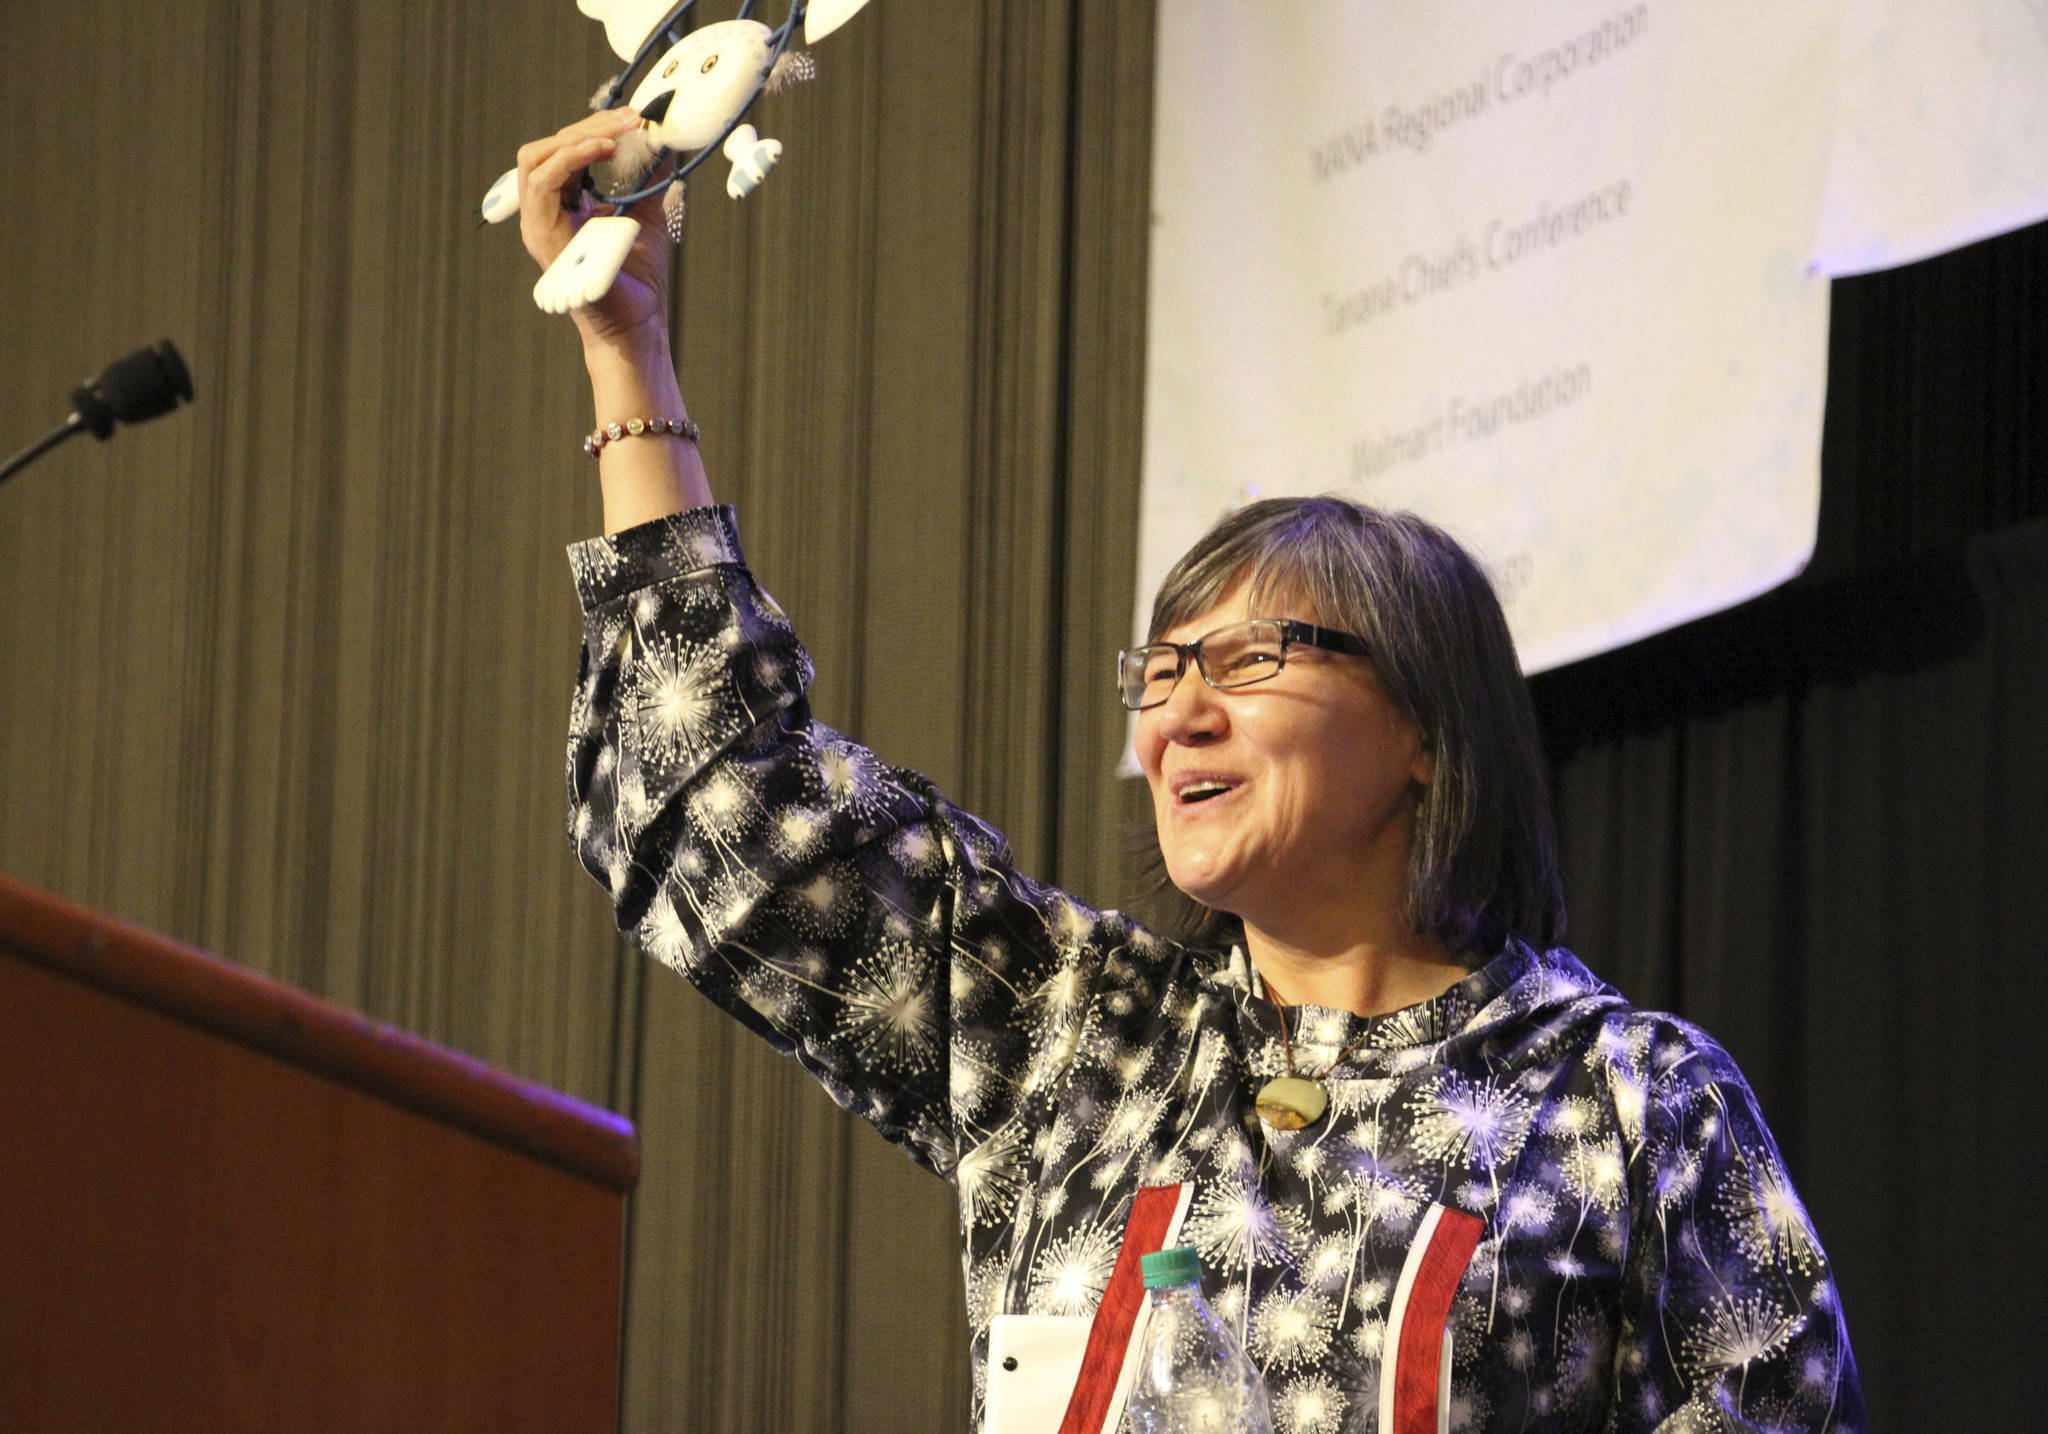 Alaska Lt. Gov. Valerie Davidson holds up an owl mask presented to her after addressing delegates at the annual Alaska Federation of Natives conference in Anchorage, Alaska, on Thursday, Oct. 18, 2018. Davidson was sworn in as lieutenant governor on Oct. 16, 2018, after Bryon Mallott resigned. (AP Photo/Mark Thiessen)